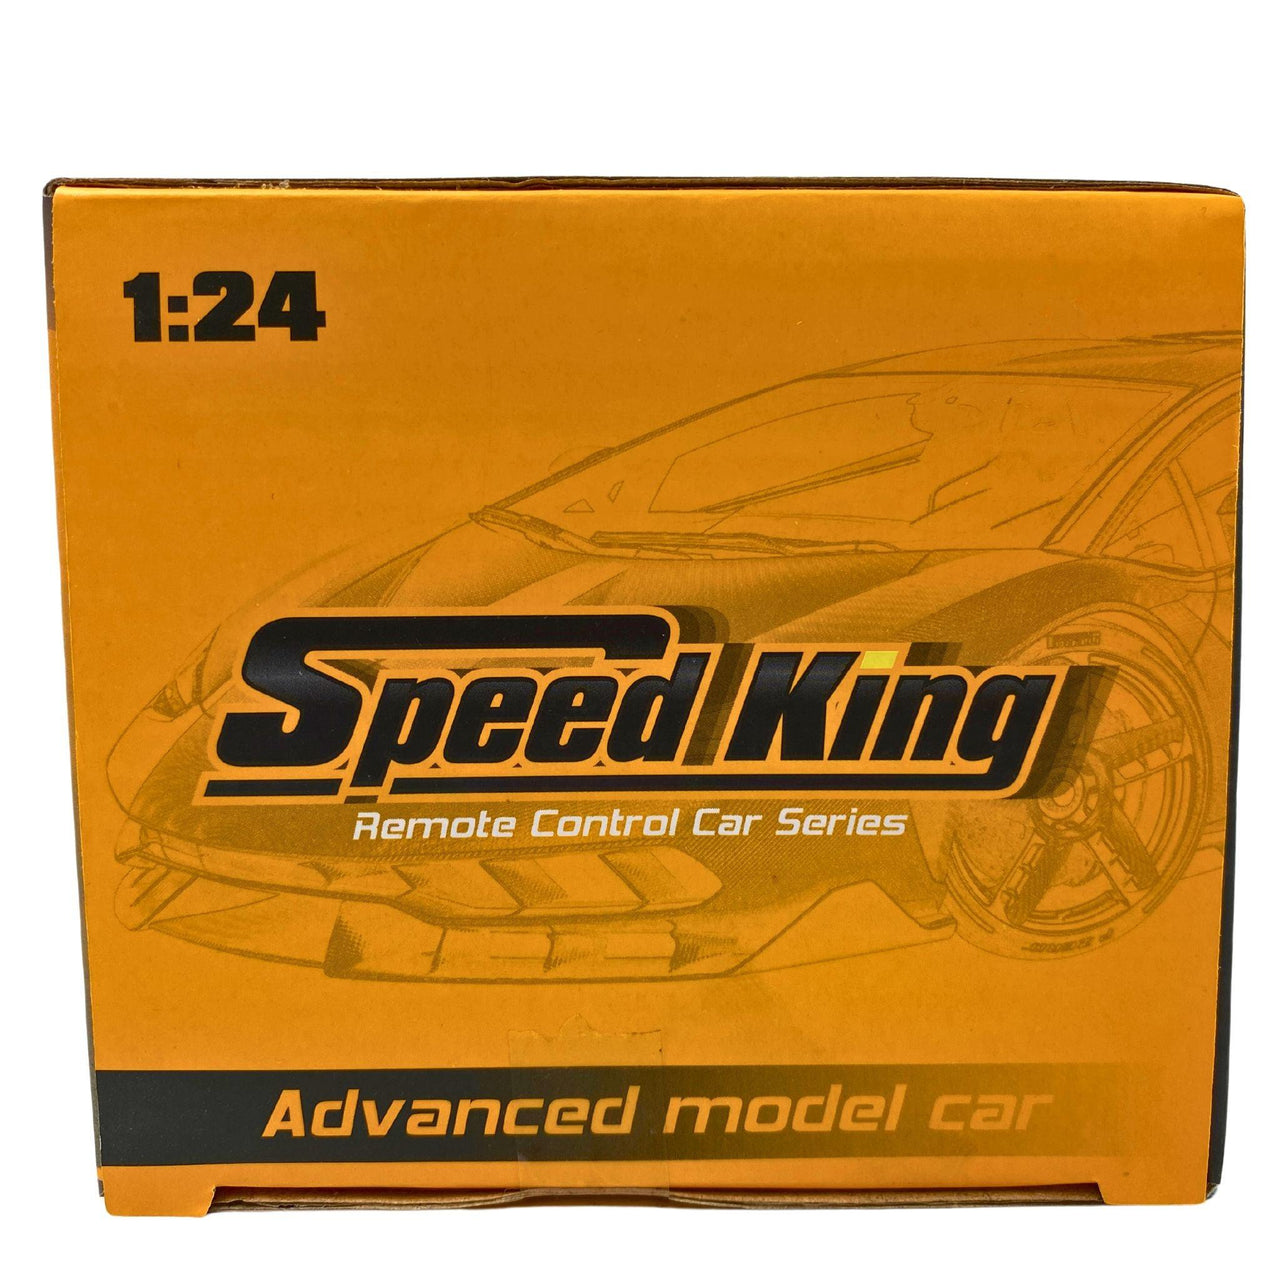 Speed King Remote Control Car Series power high speed for ages 6+ 1:24 Scale (40 Pcs Lot) - Discount Wholesalers Inc